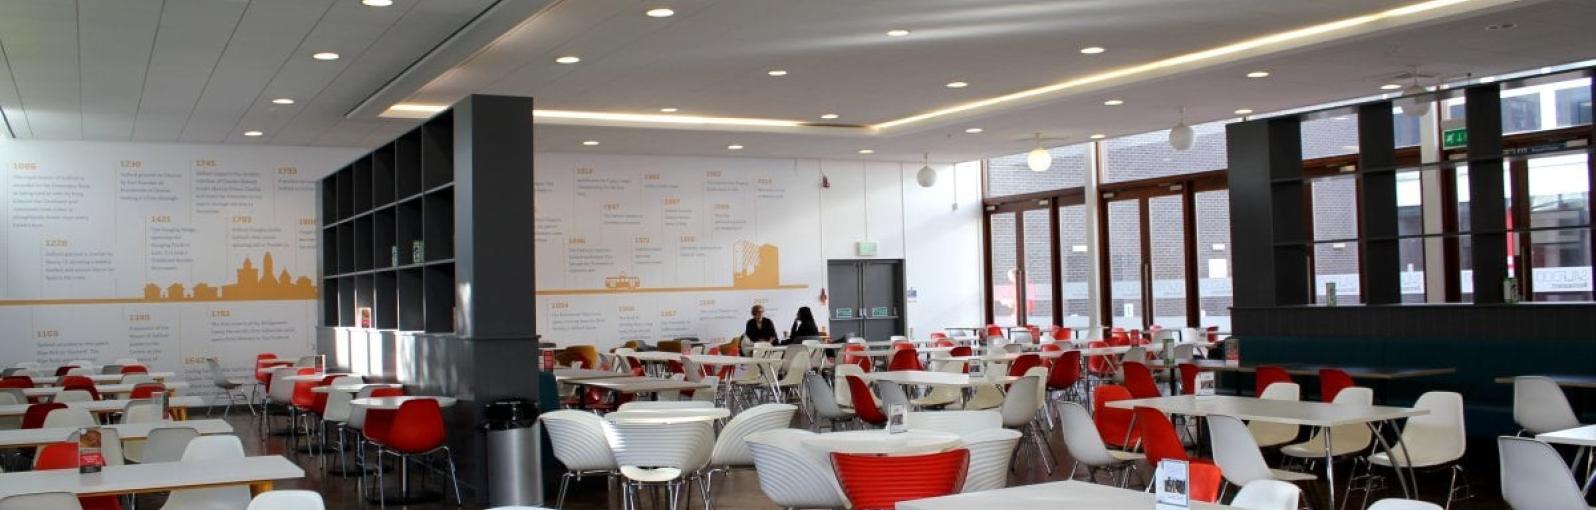 Seating at Allerton Refectory, University of Salford